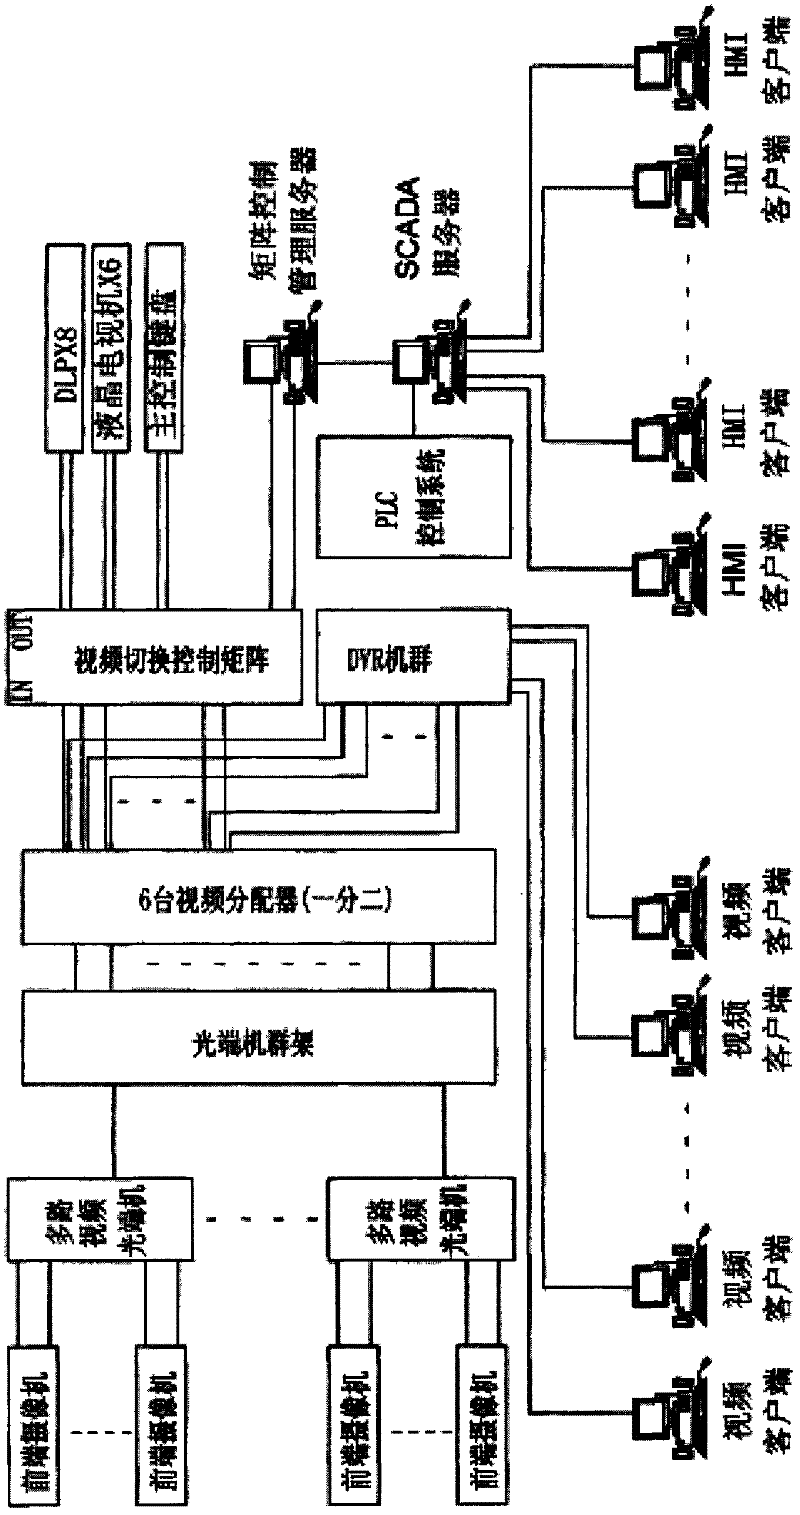 Multi-device cooperation alarm analysis processing system